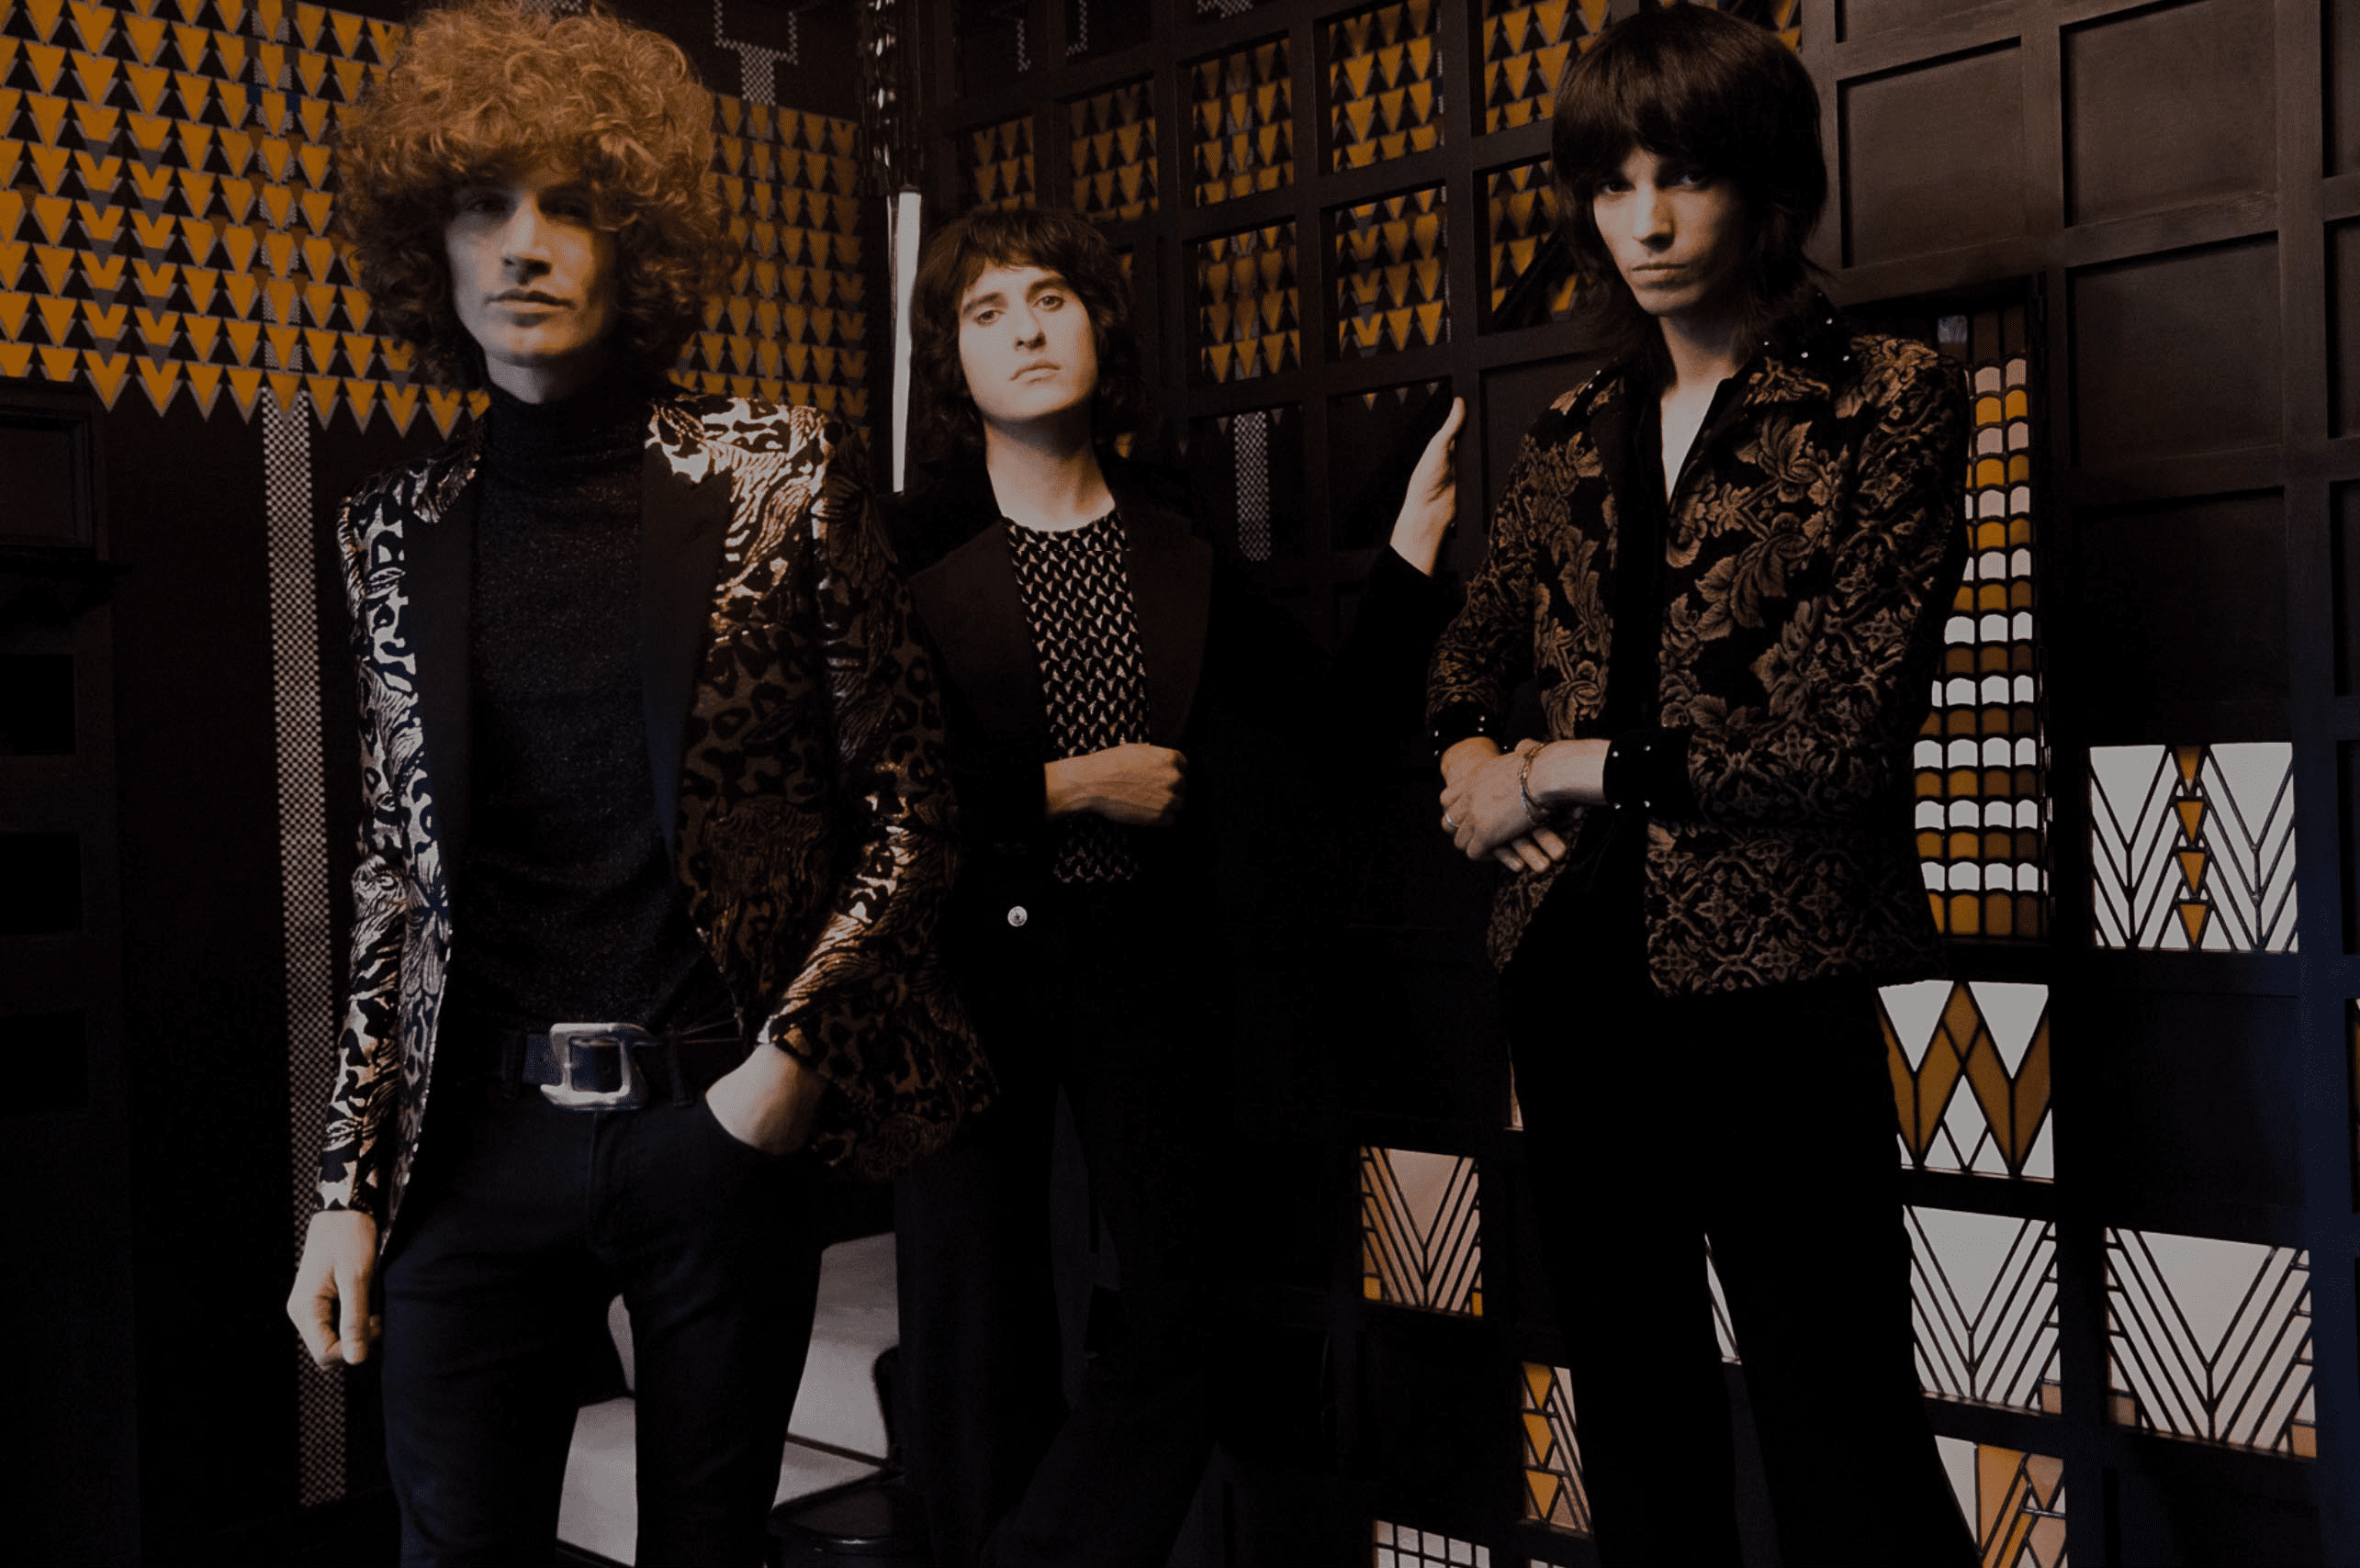 Temples’ ‘Hot Motion’ Is an Uninspiring Emulation of Their Existing Sound